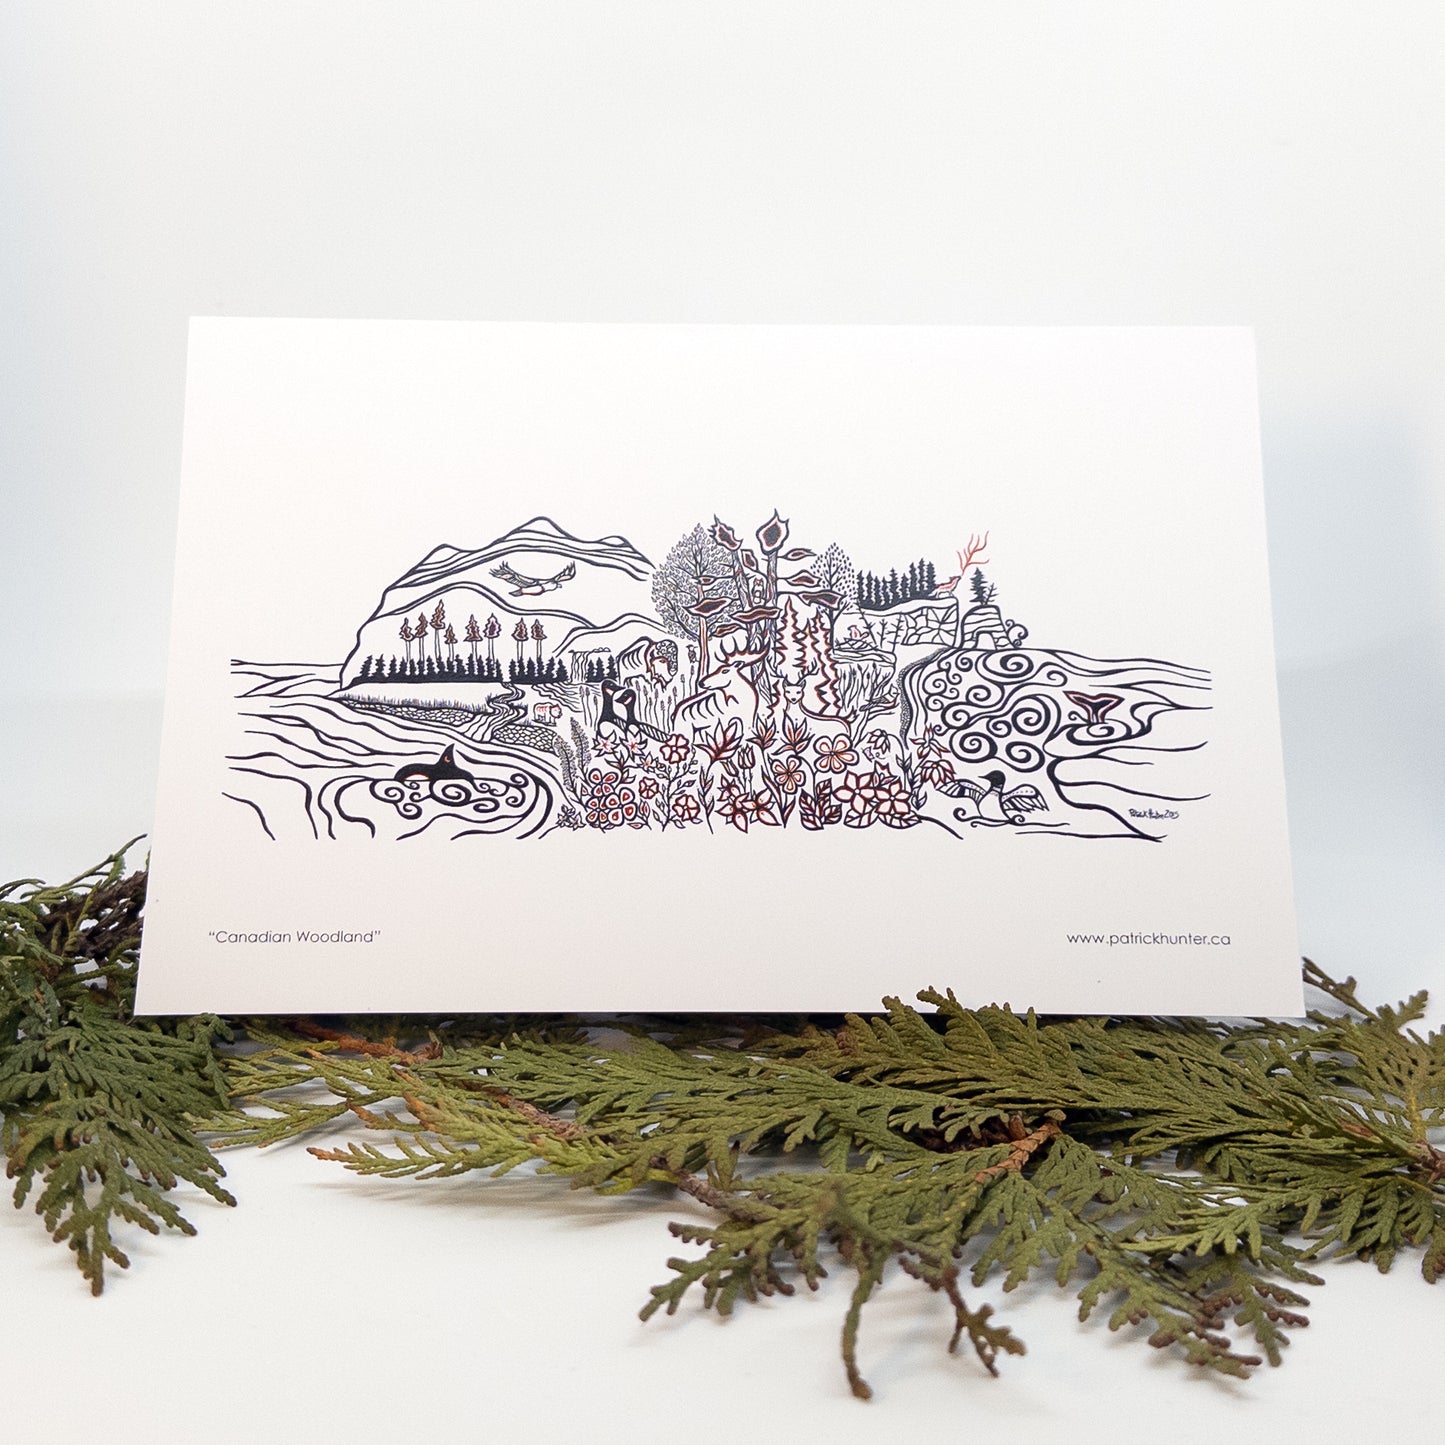 A greeting card with Patrick Hunter's Canadian Woodland work in woodland art style rests on cedar boughs.